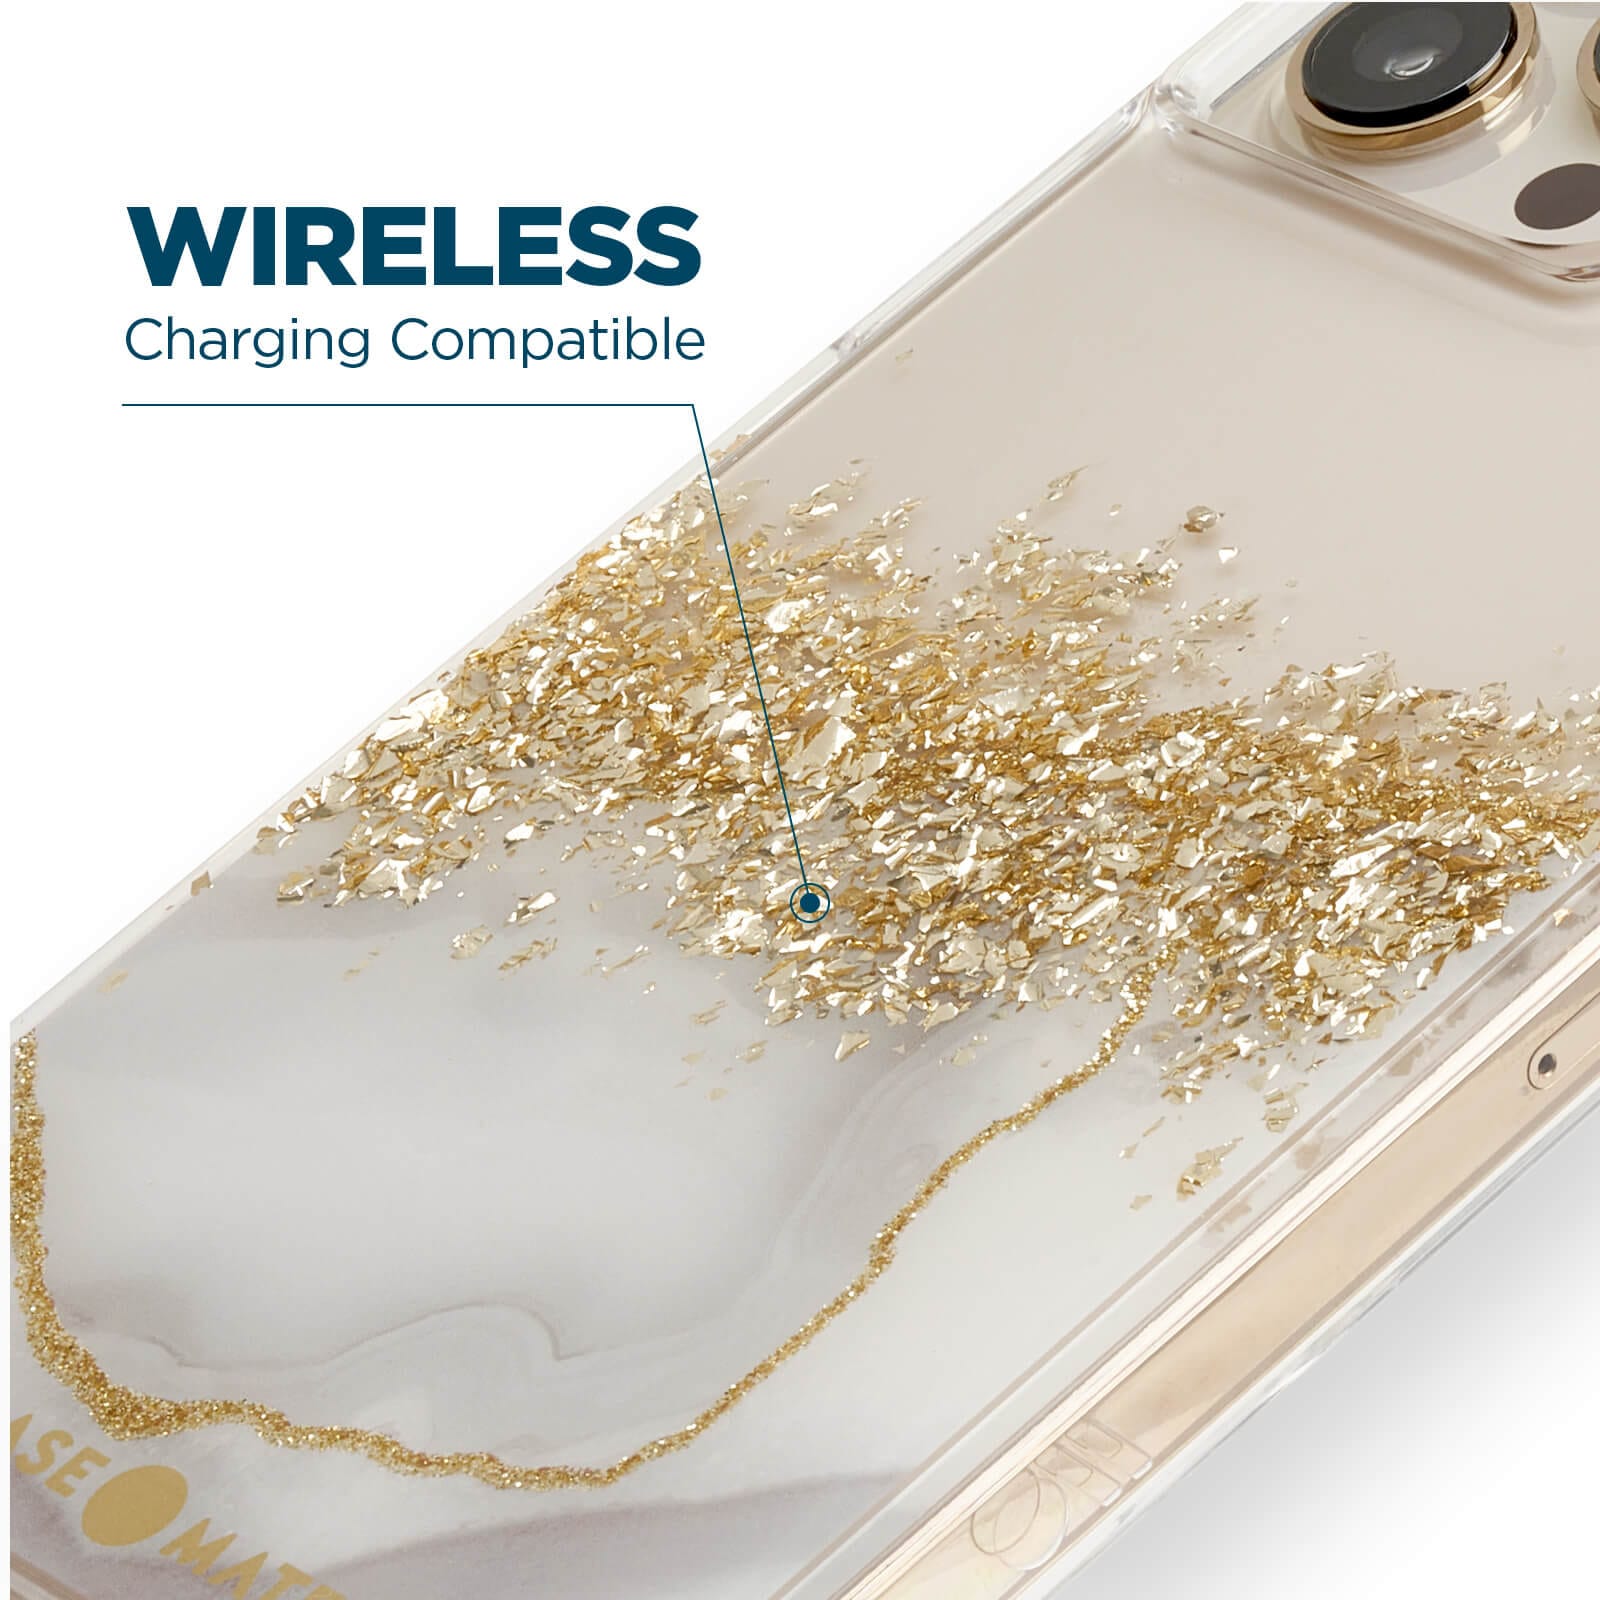 Wireless charging compatible. color::Karat Marble